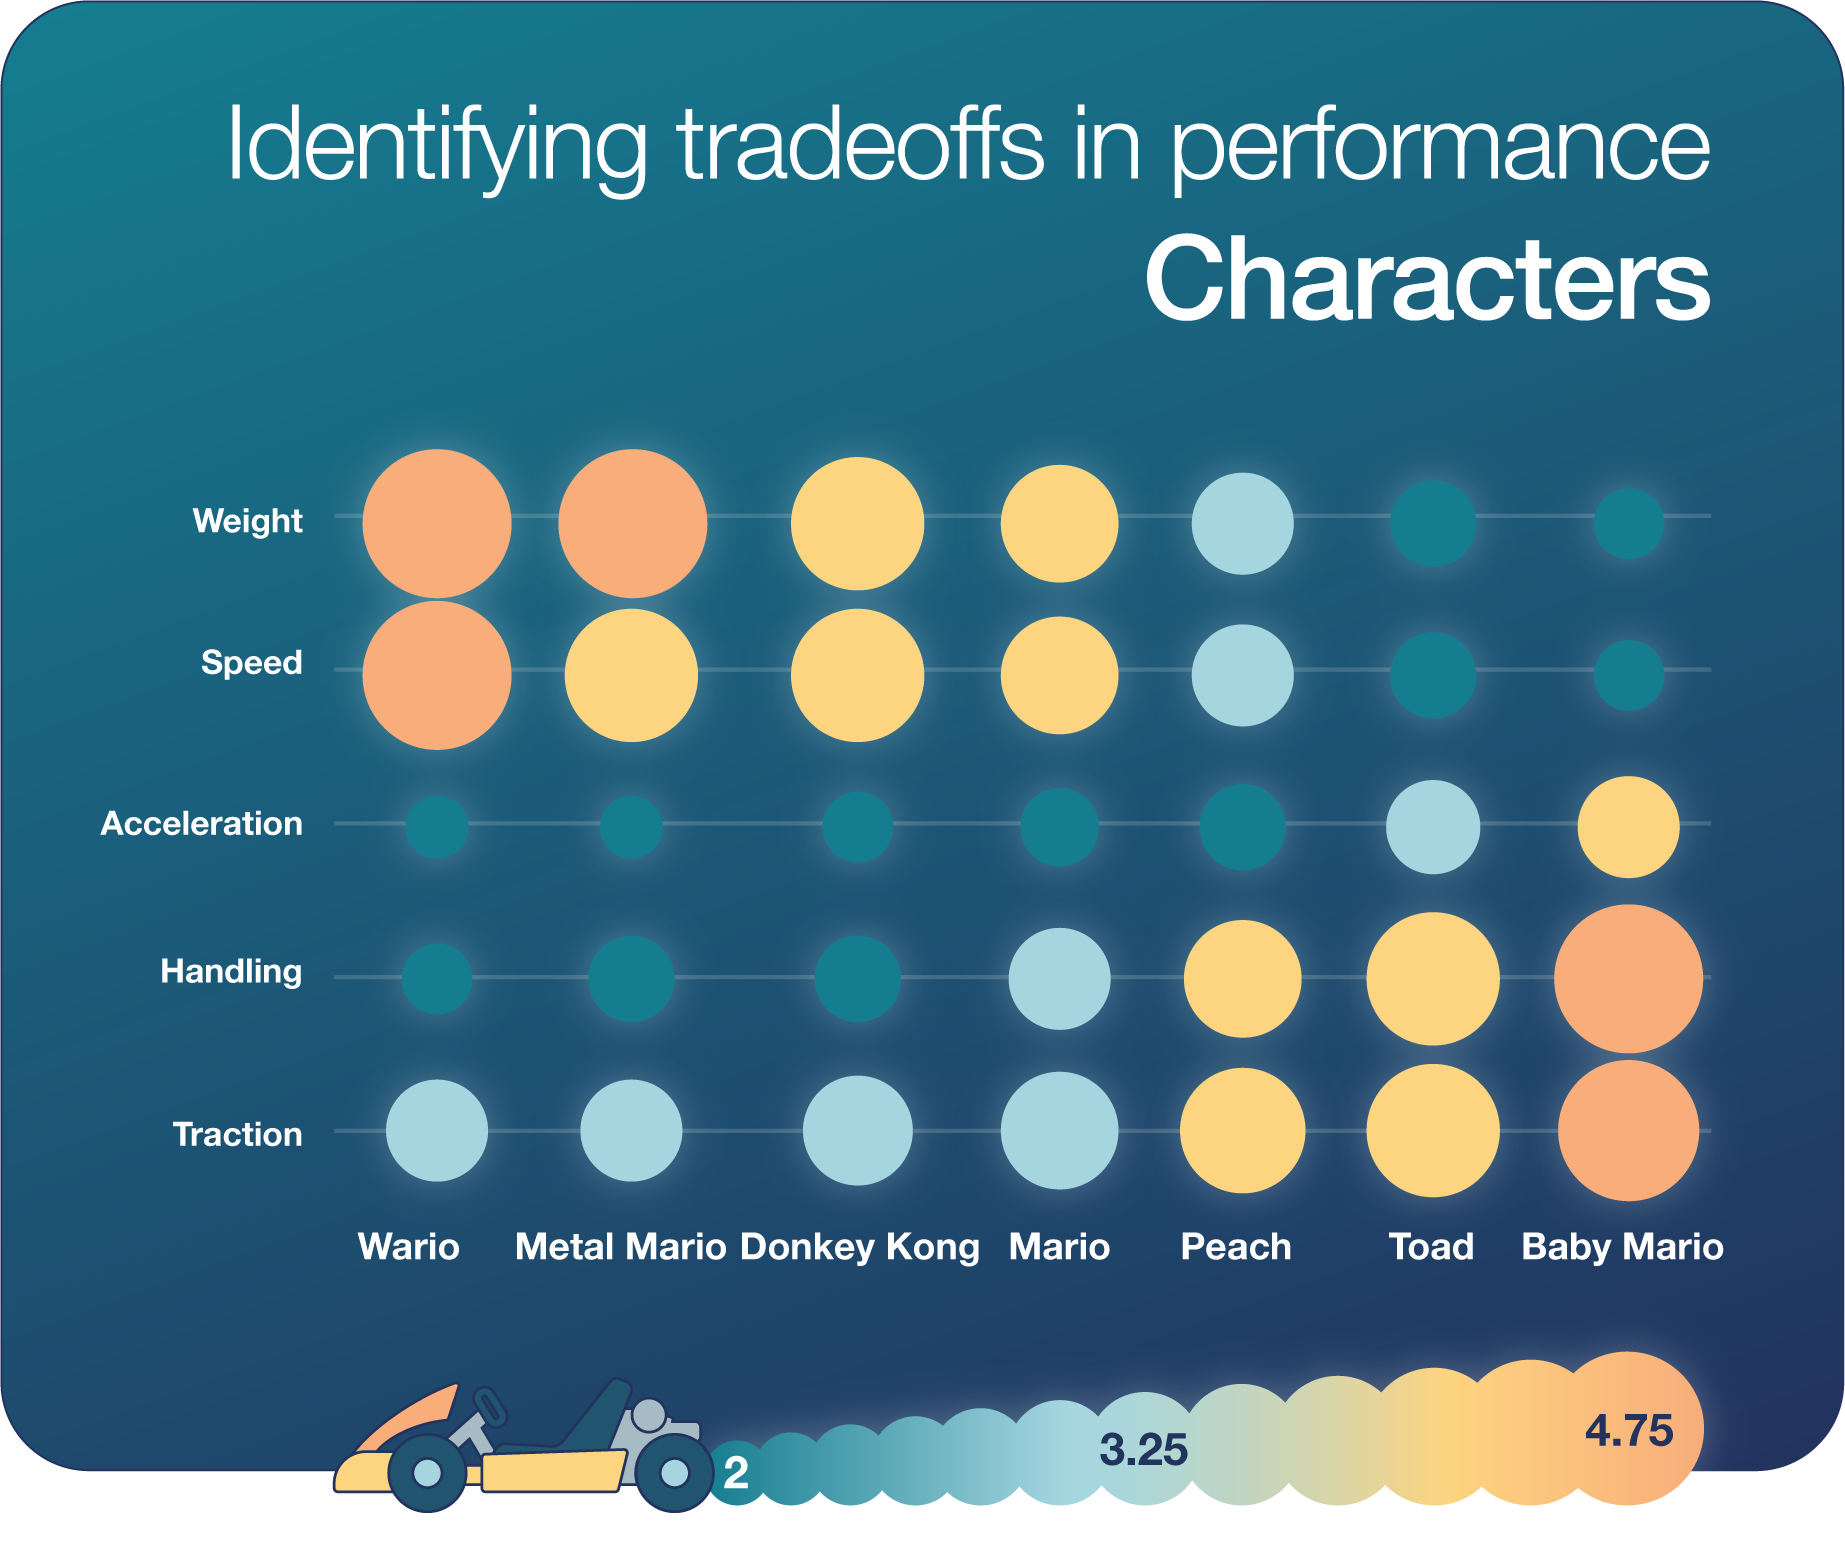 Identifying tradeoffs in performance for specific characters